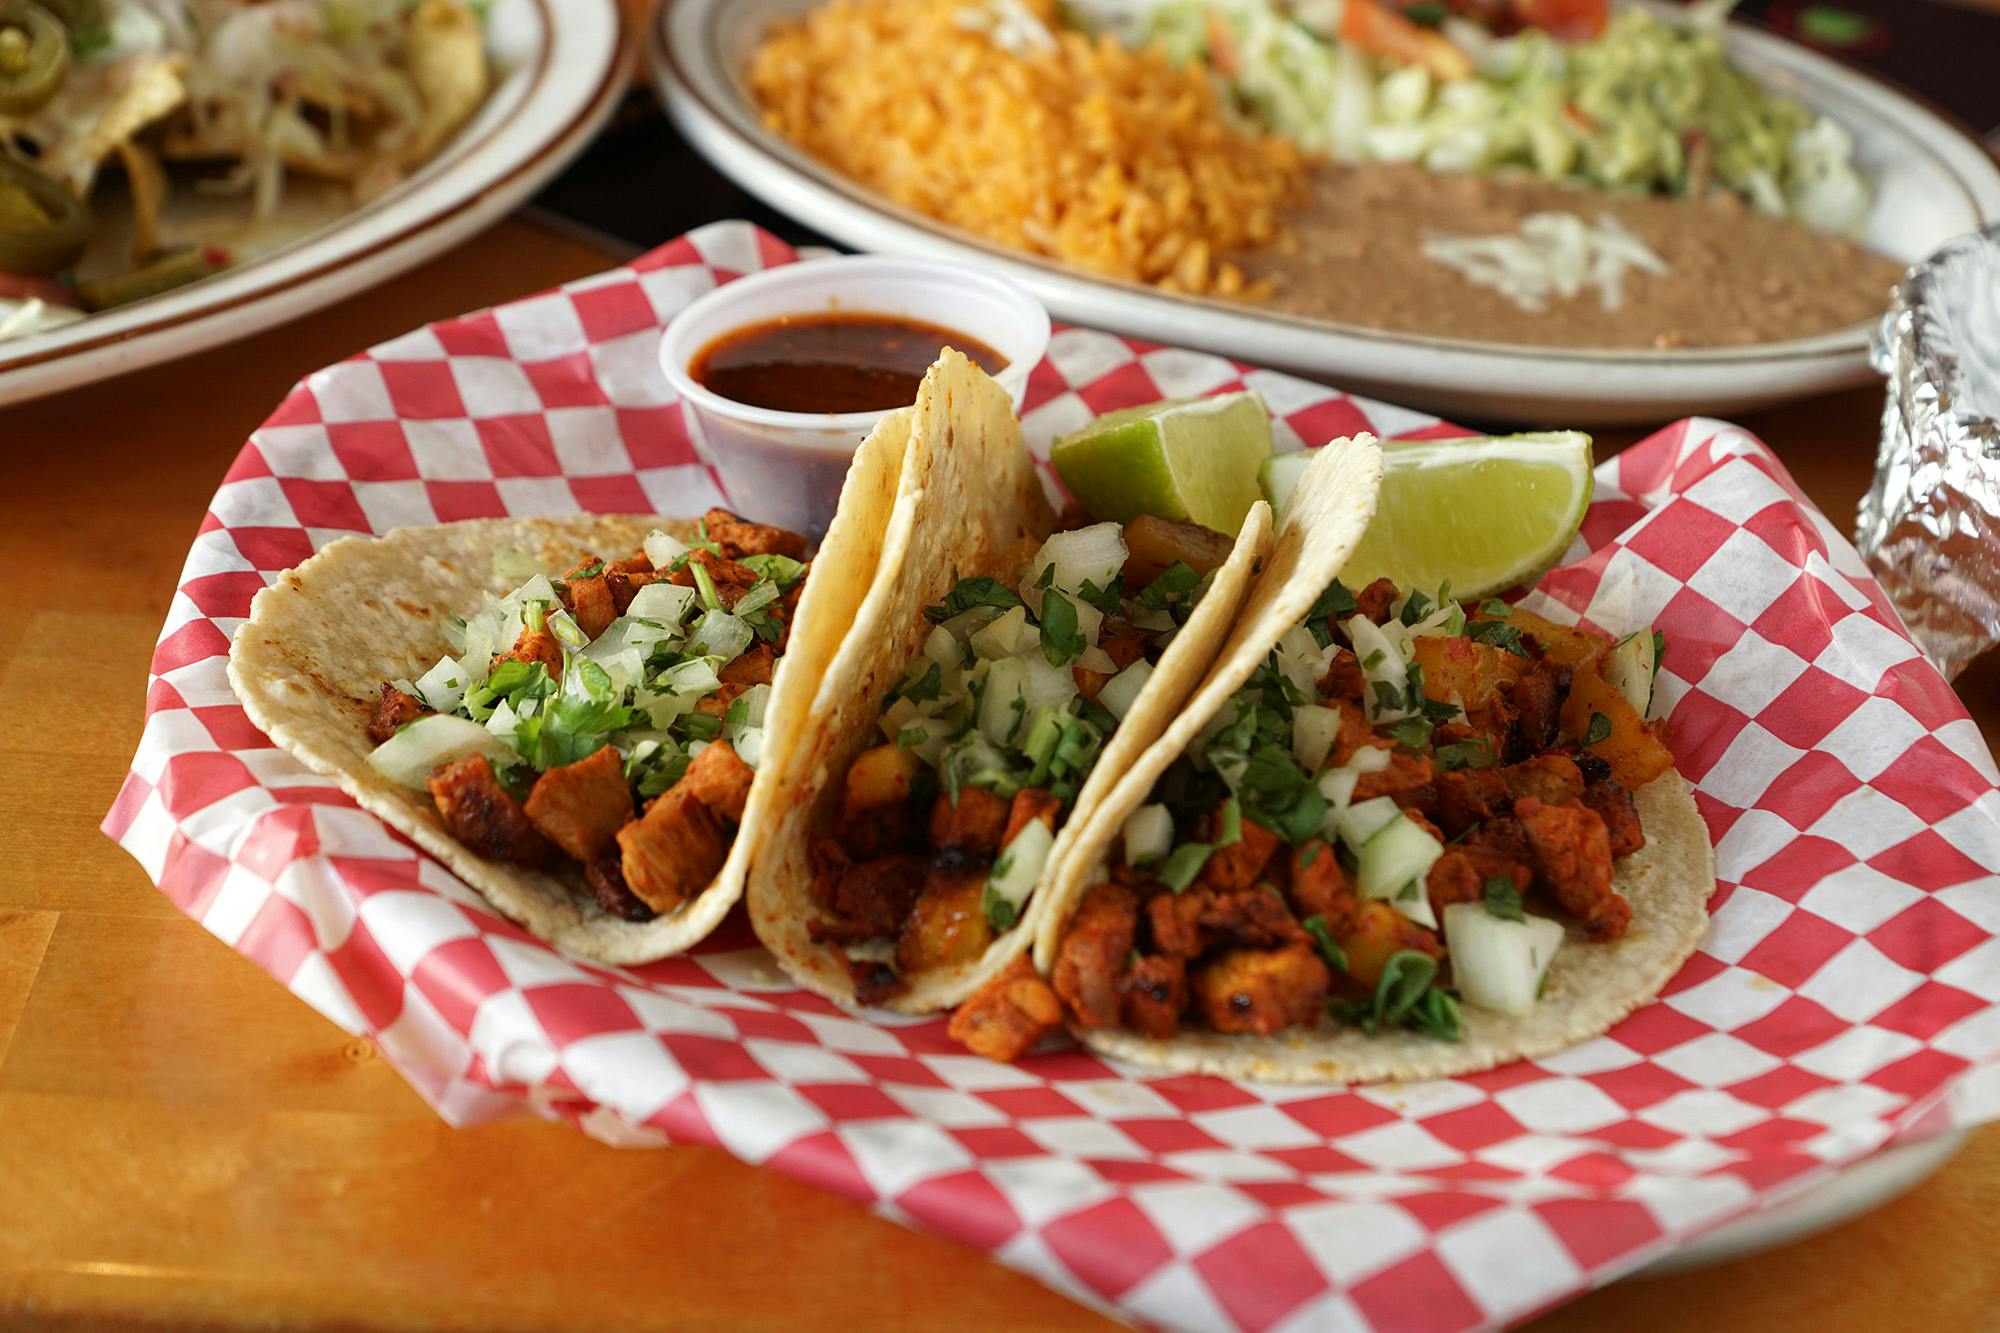 Pastor Tacos from Tequila Bar & Grill in La Crosse, WI